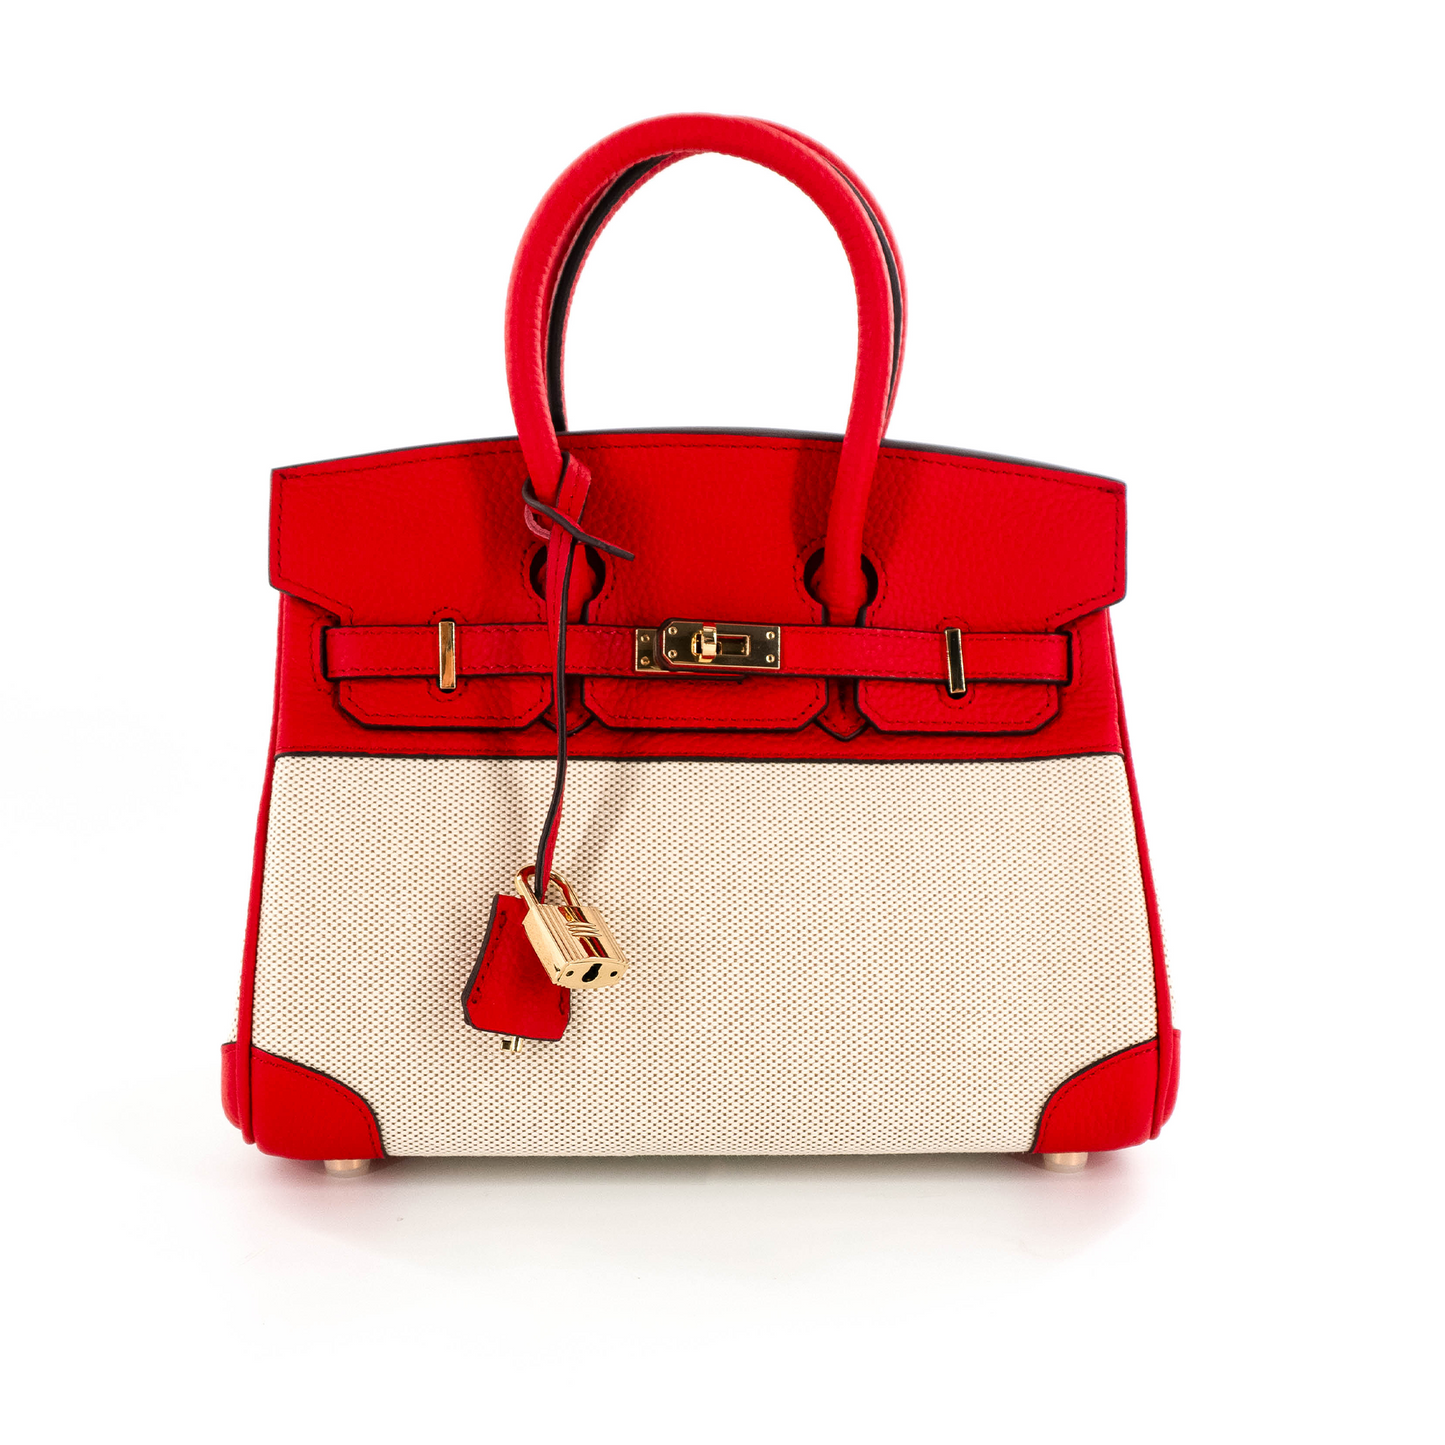 Duchess Handbag in Linen and Red Leather